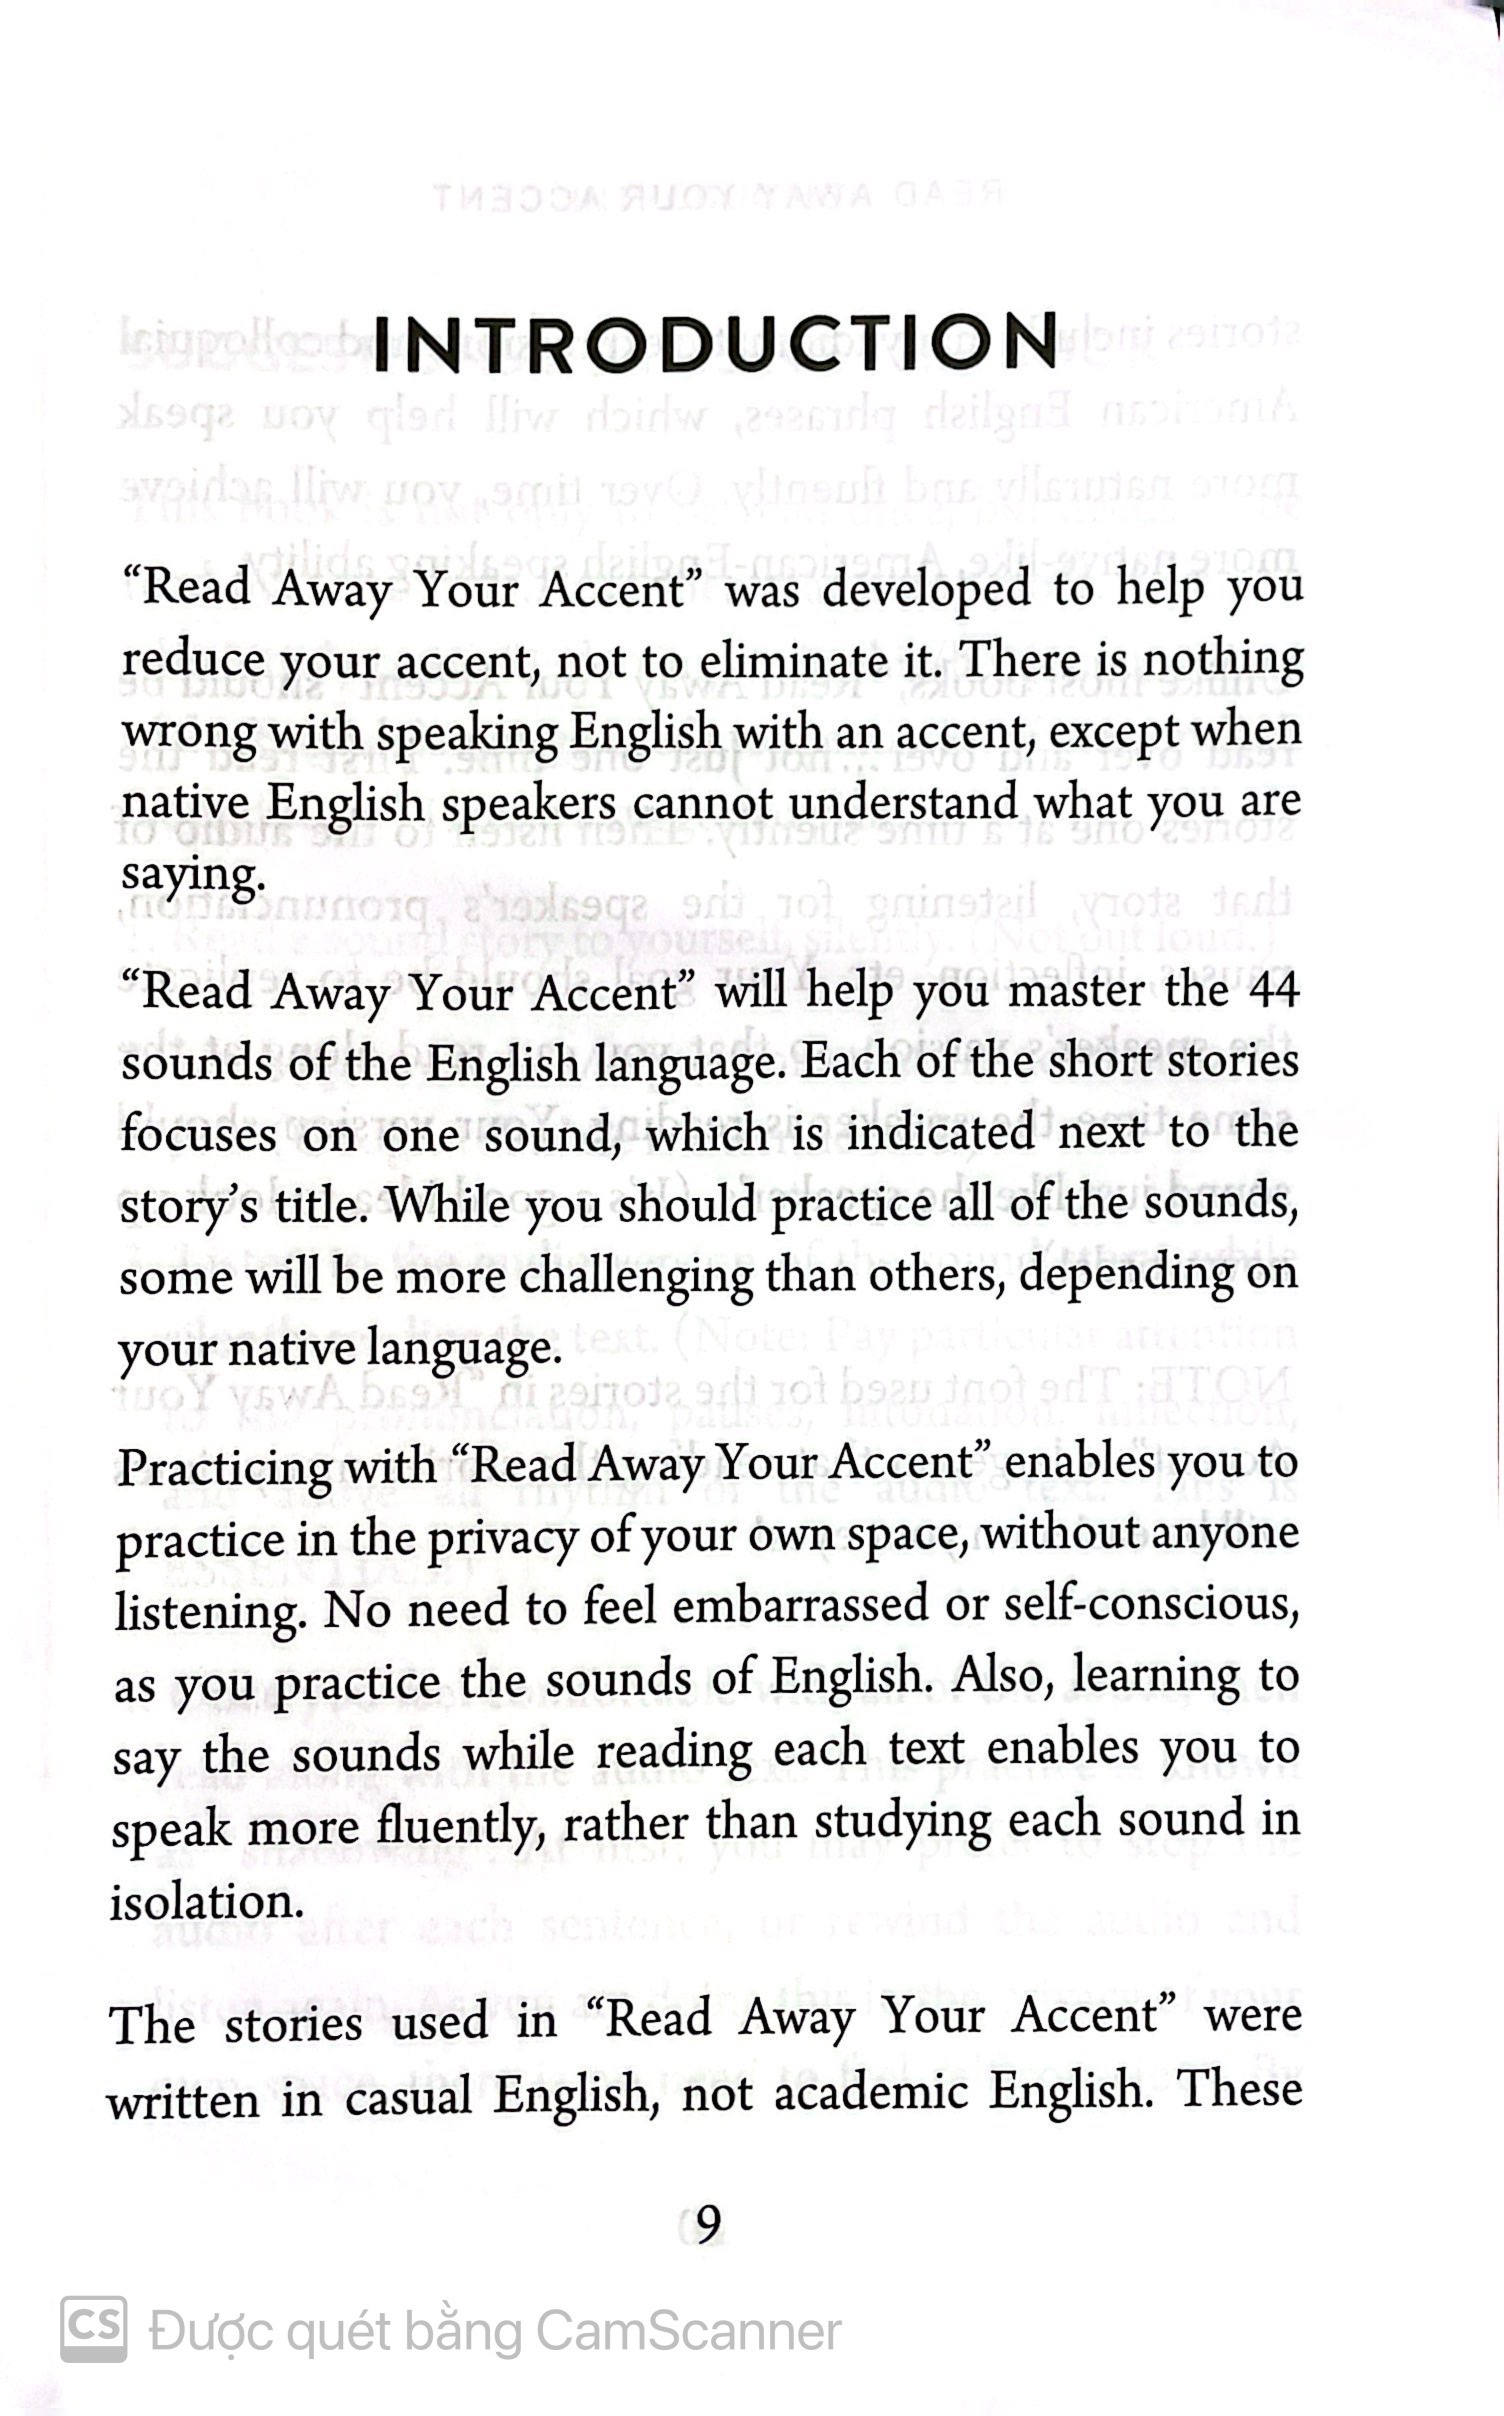 Read away your accent